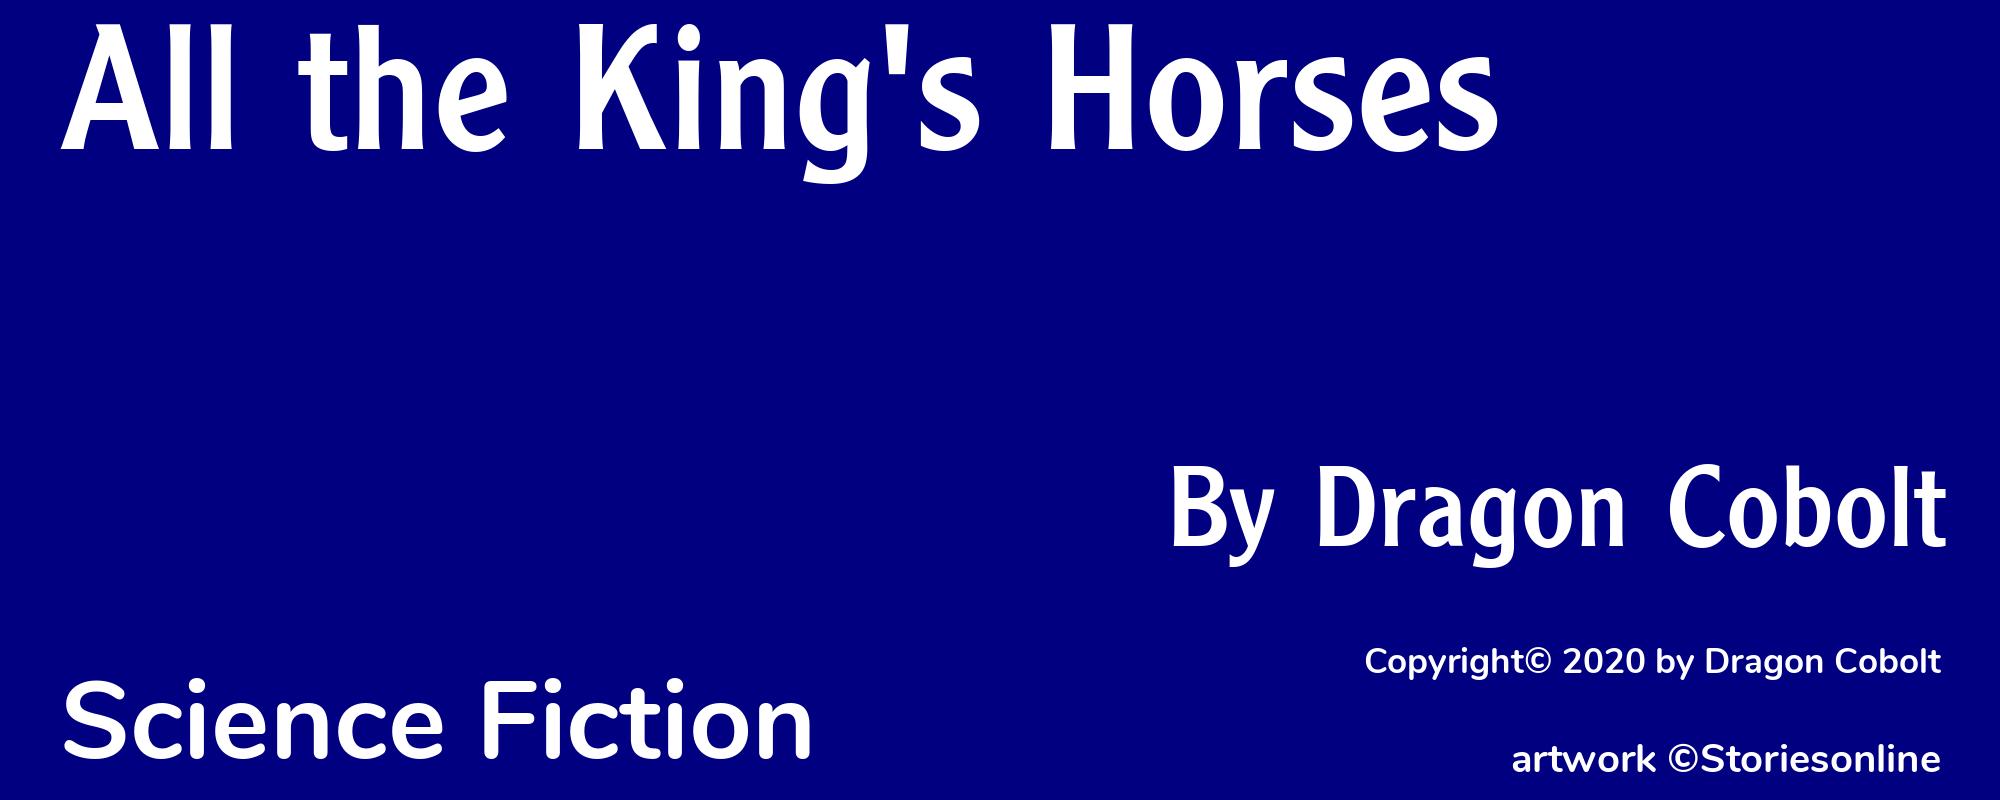 All the King's Horses - Cover